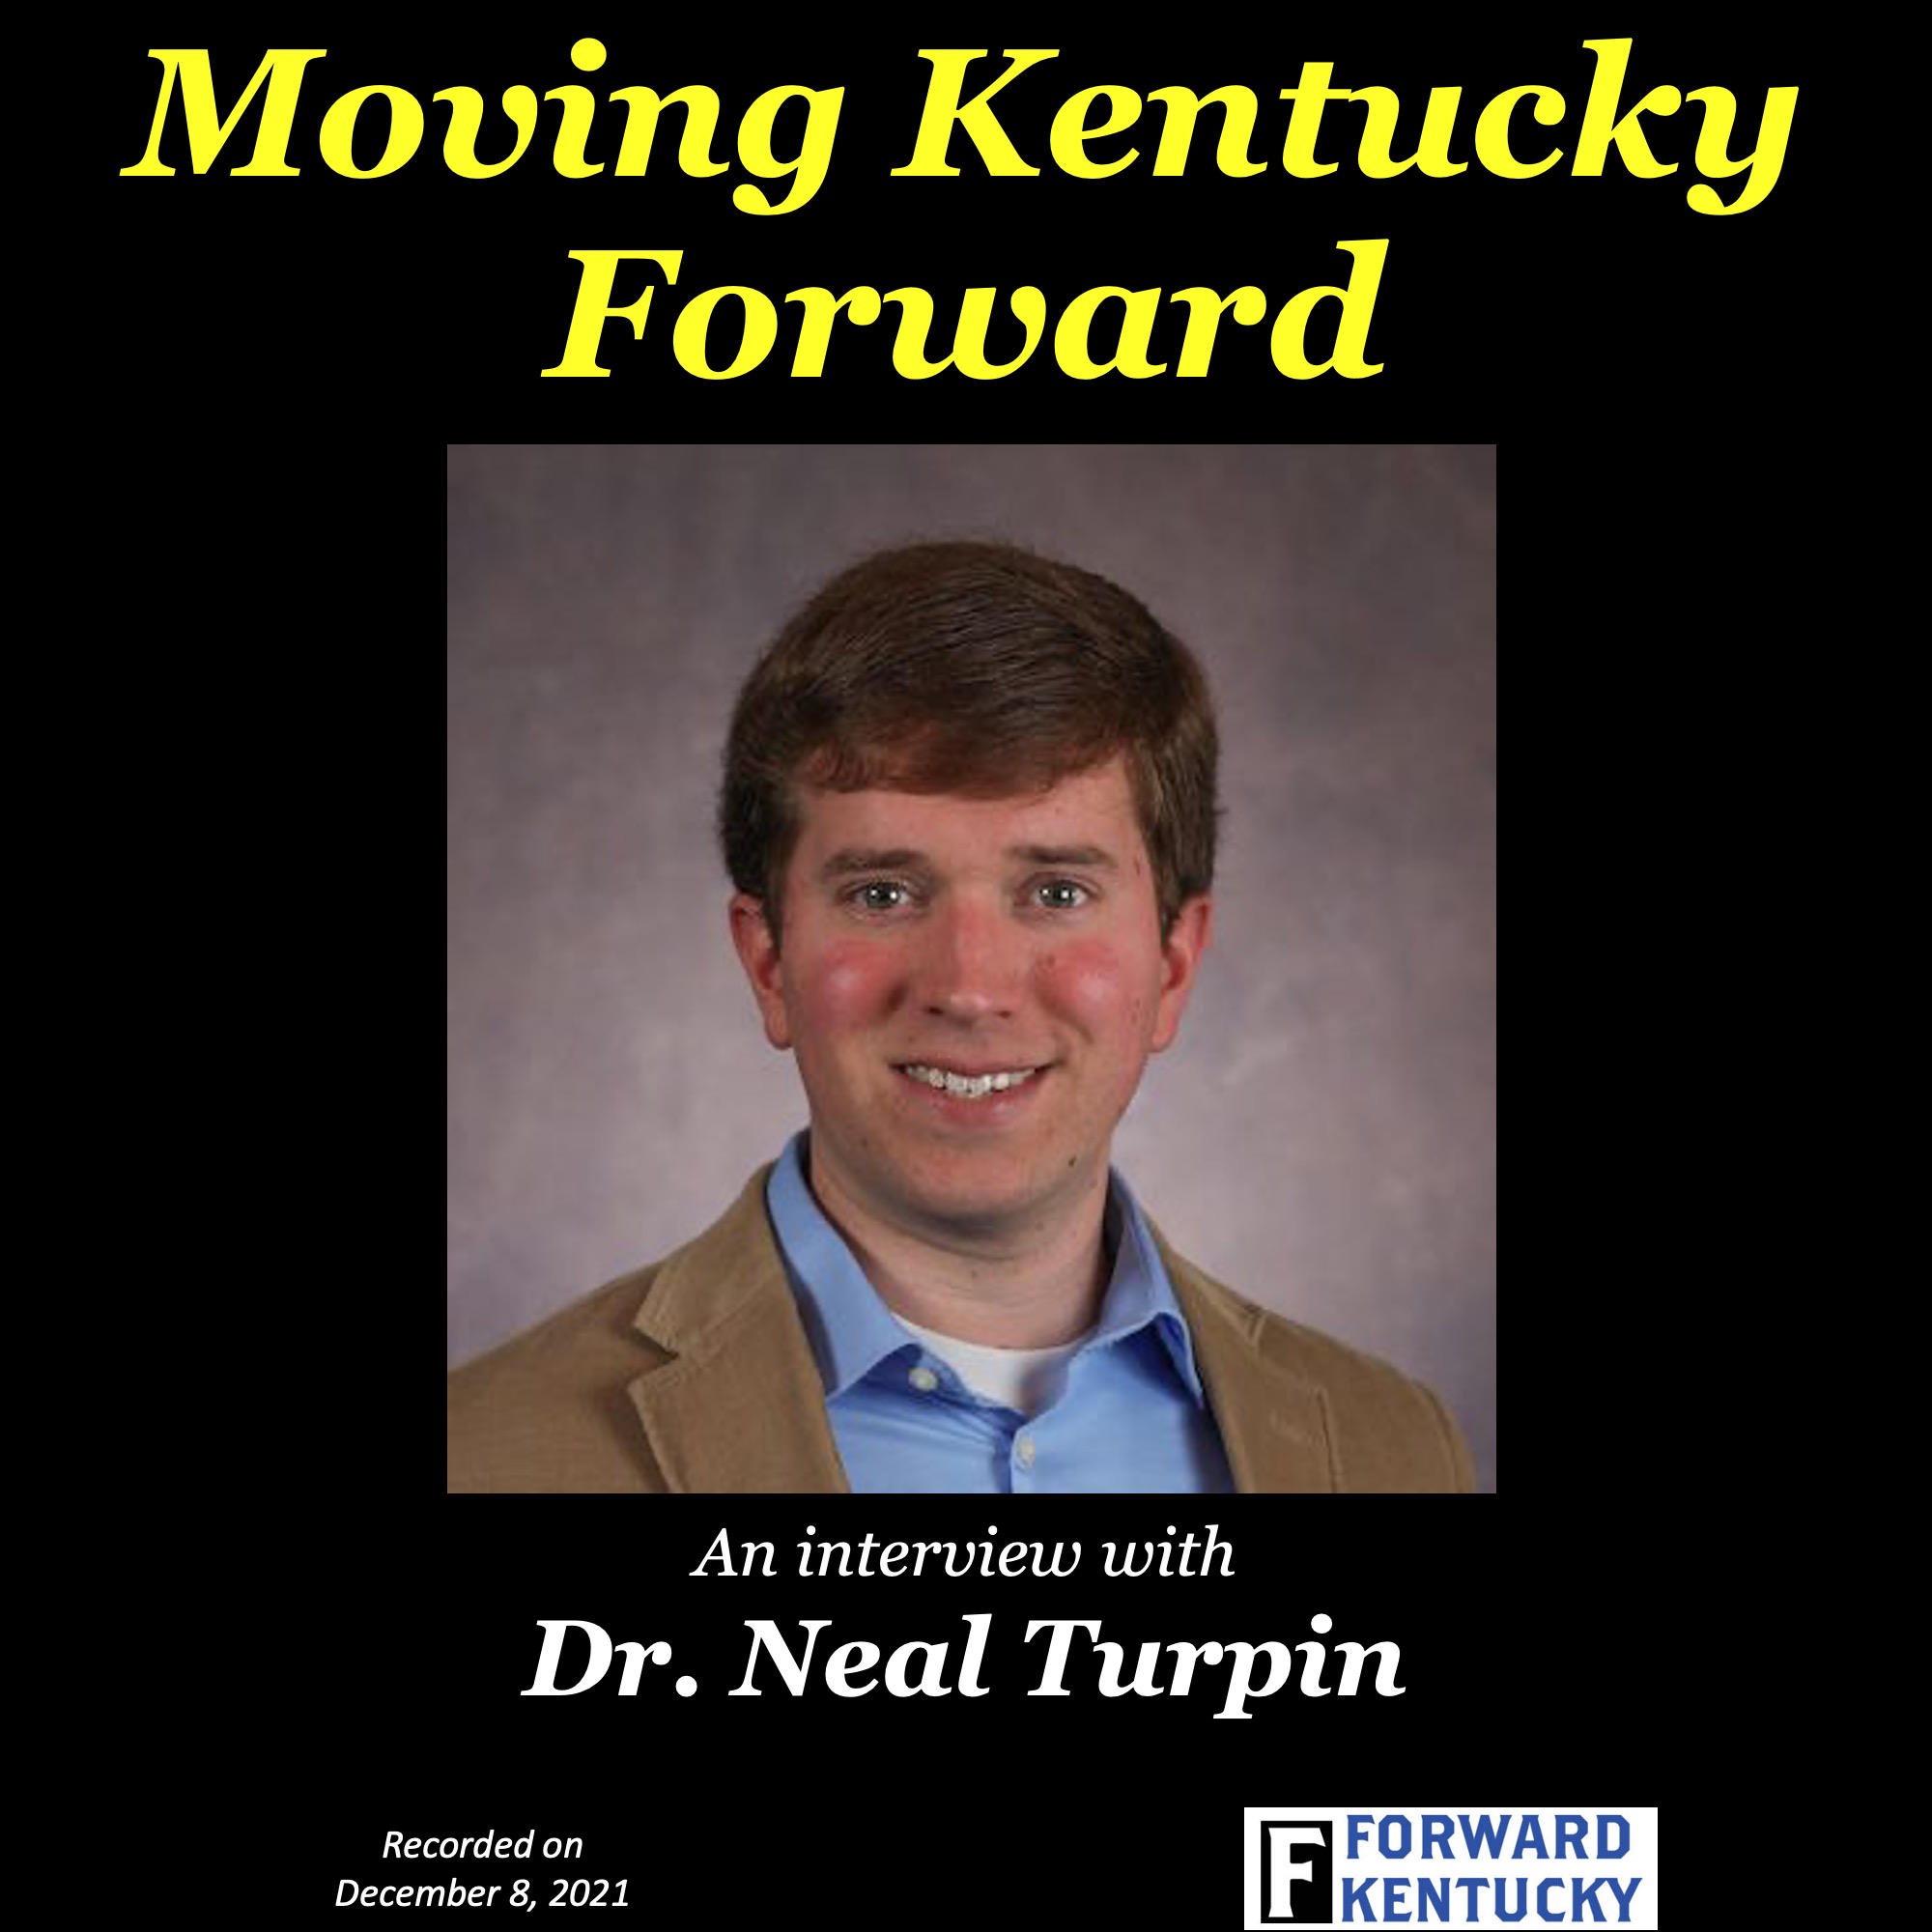 An interview with Dr. Neal Turpin